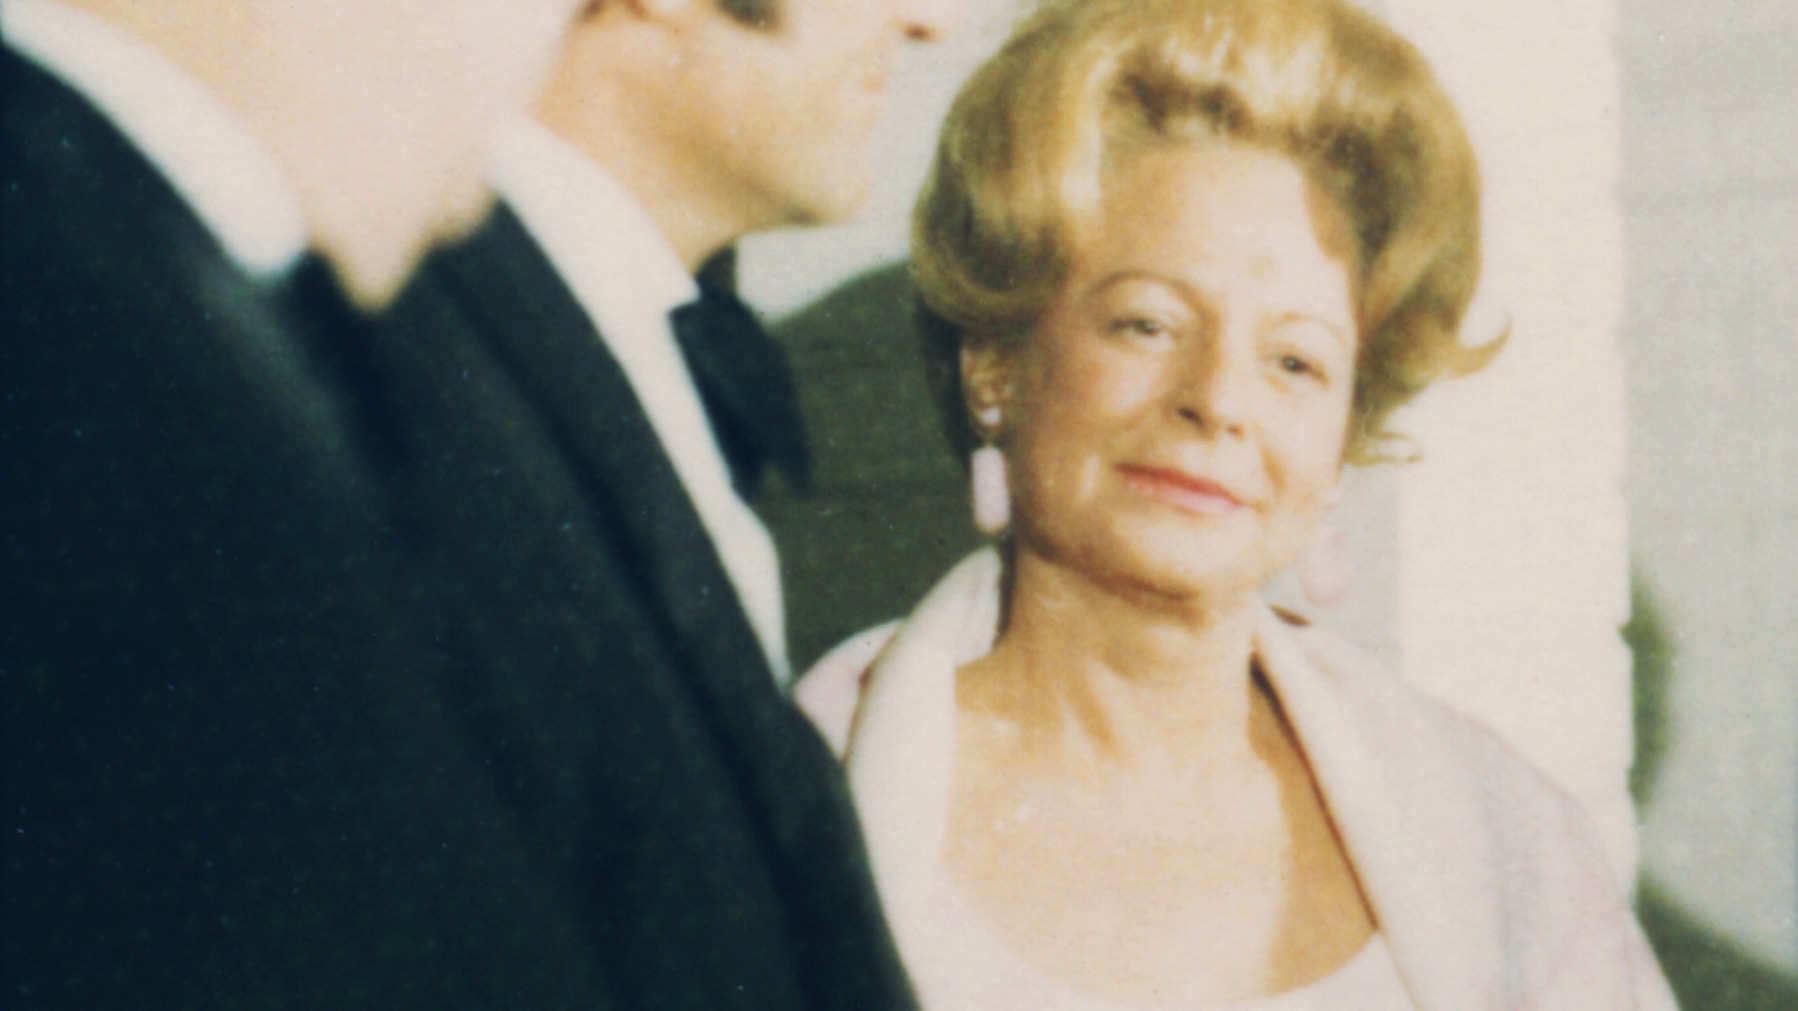 An older white woman with blonde hair and an open necked blouse with two men in suits